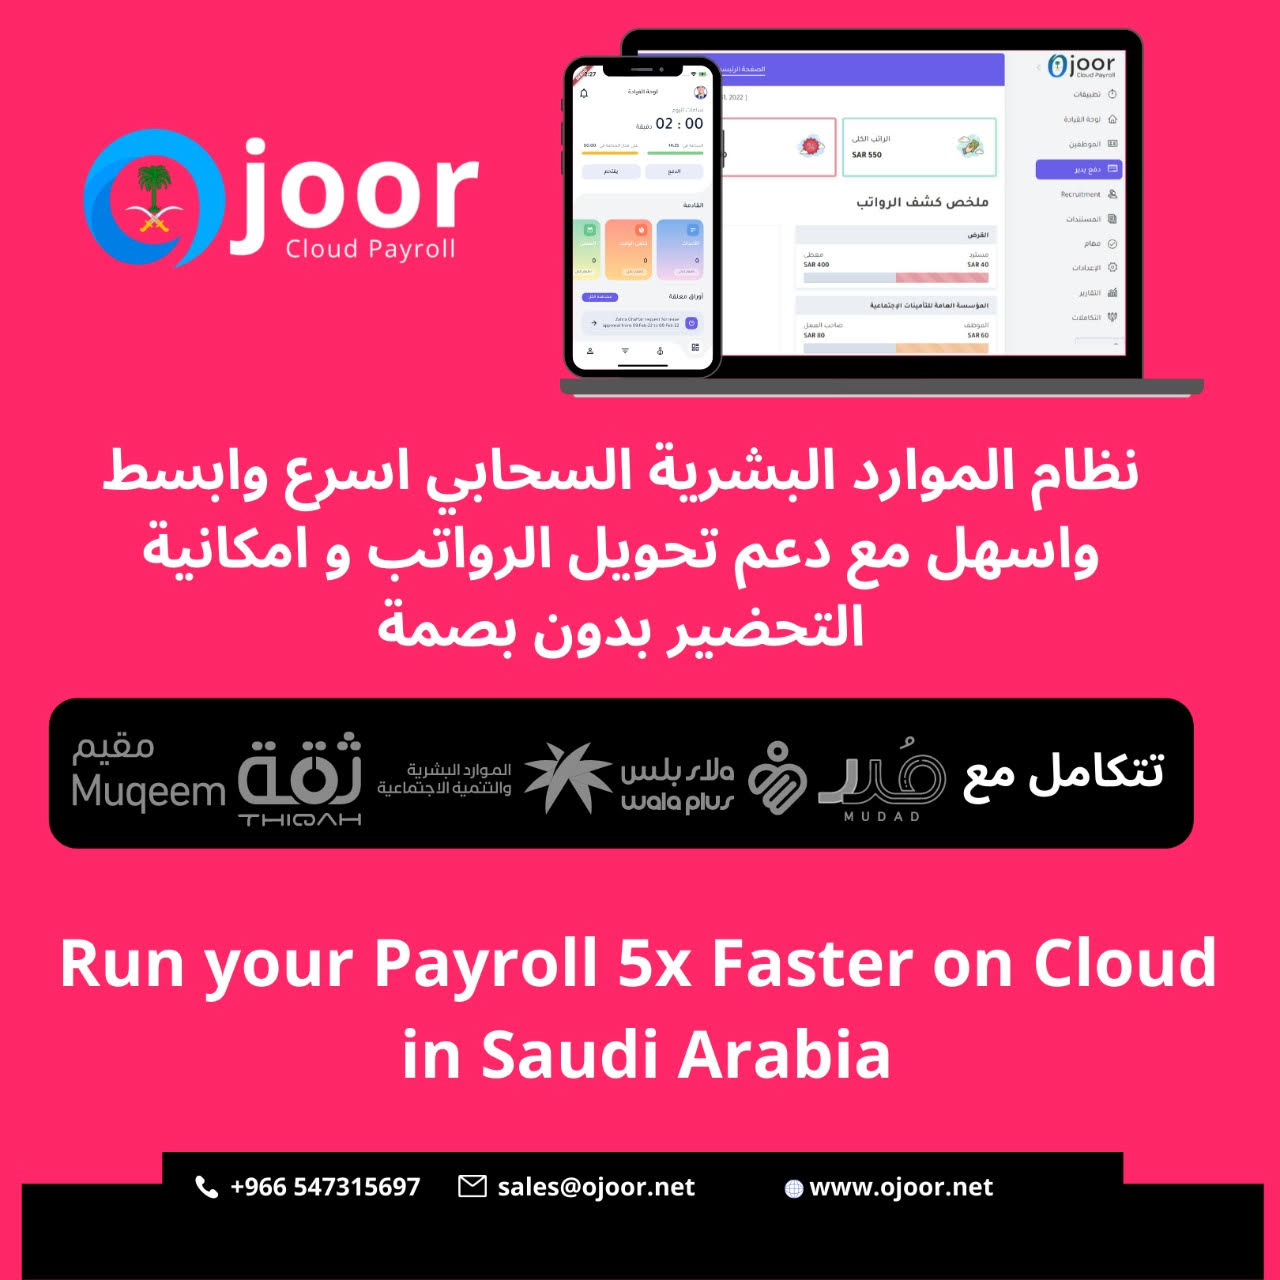 What are the features for small business in Payroll Software in Saudi?